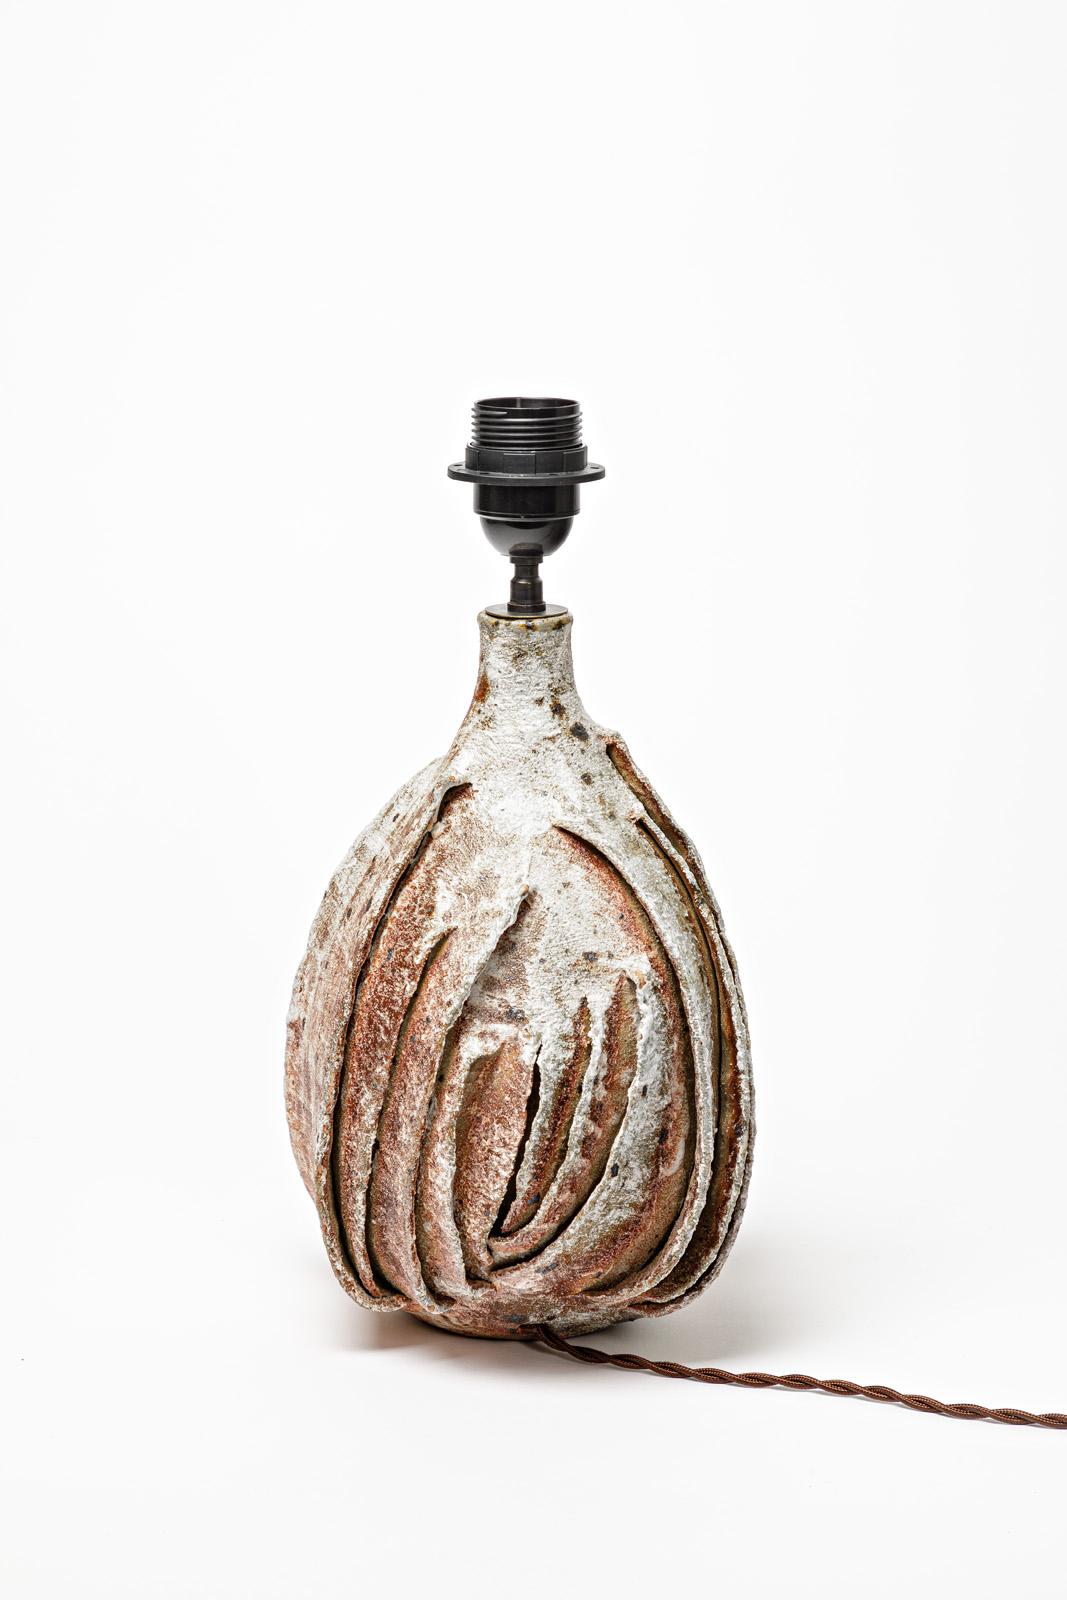 Beaux Arts Glazed and Engobed Stoneware Lamp by Bruno H'rdy to La Borne, circa 1970 For Sale